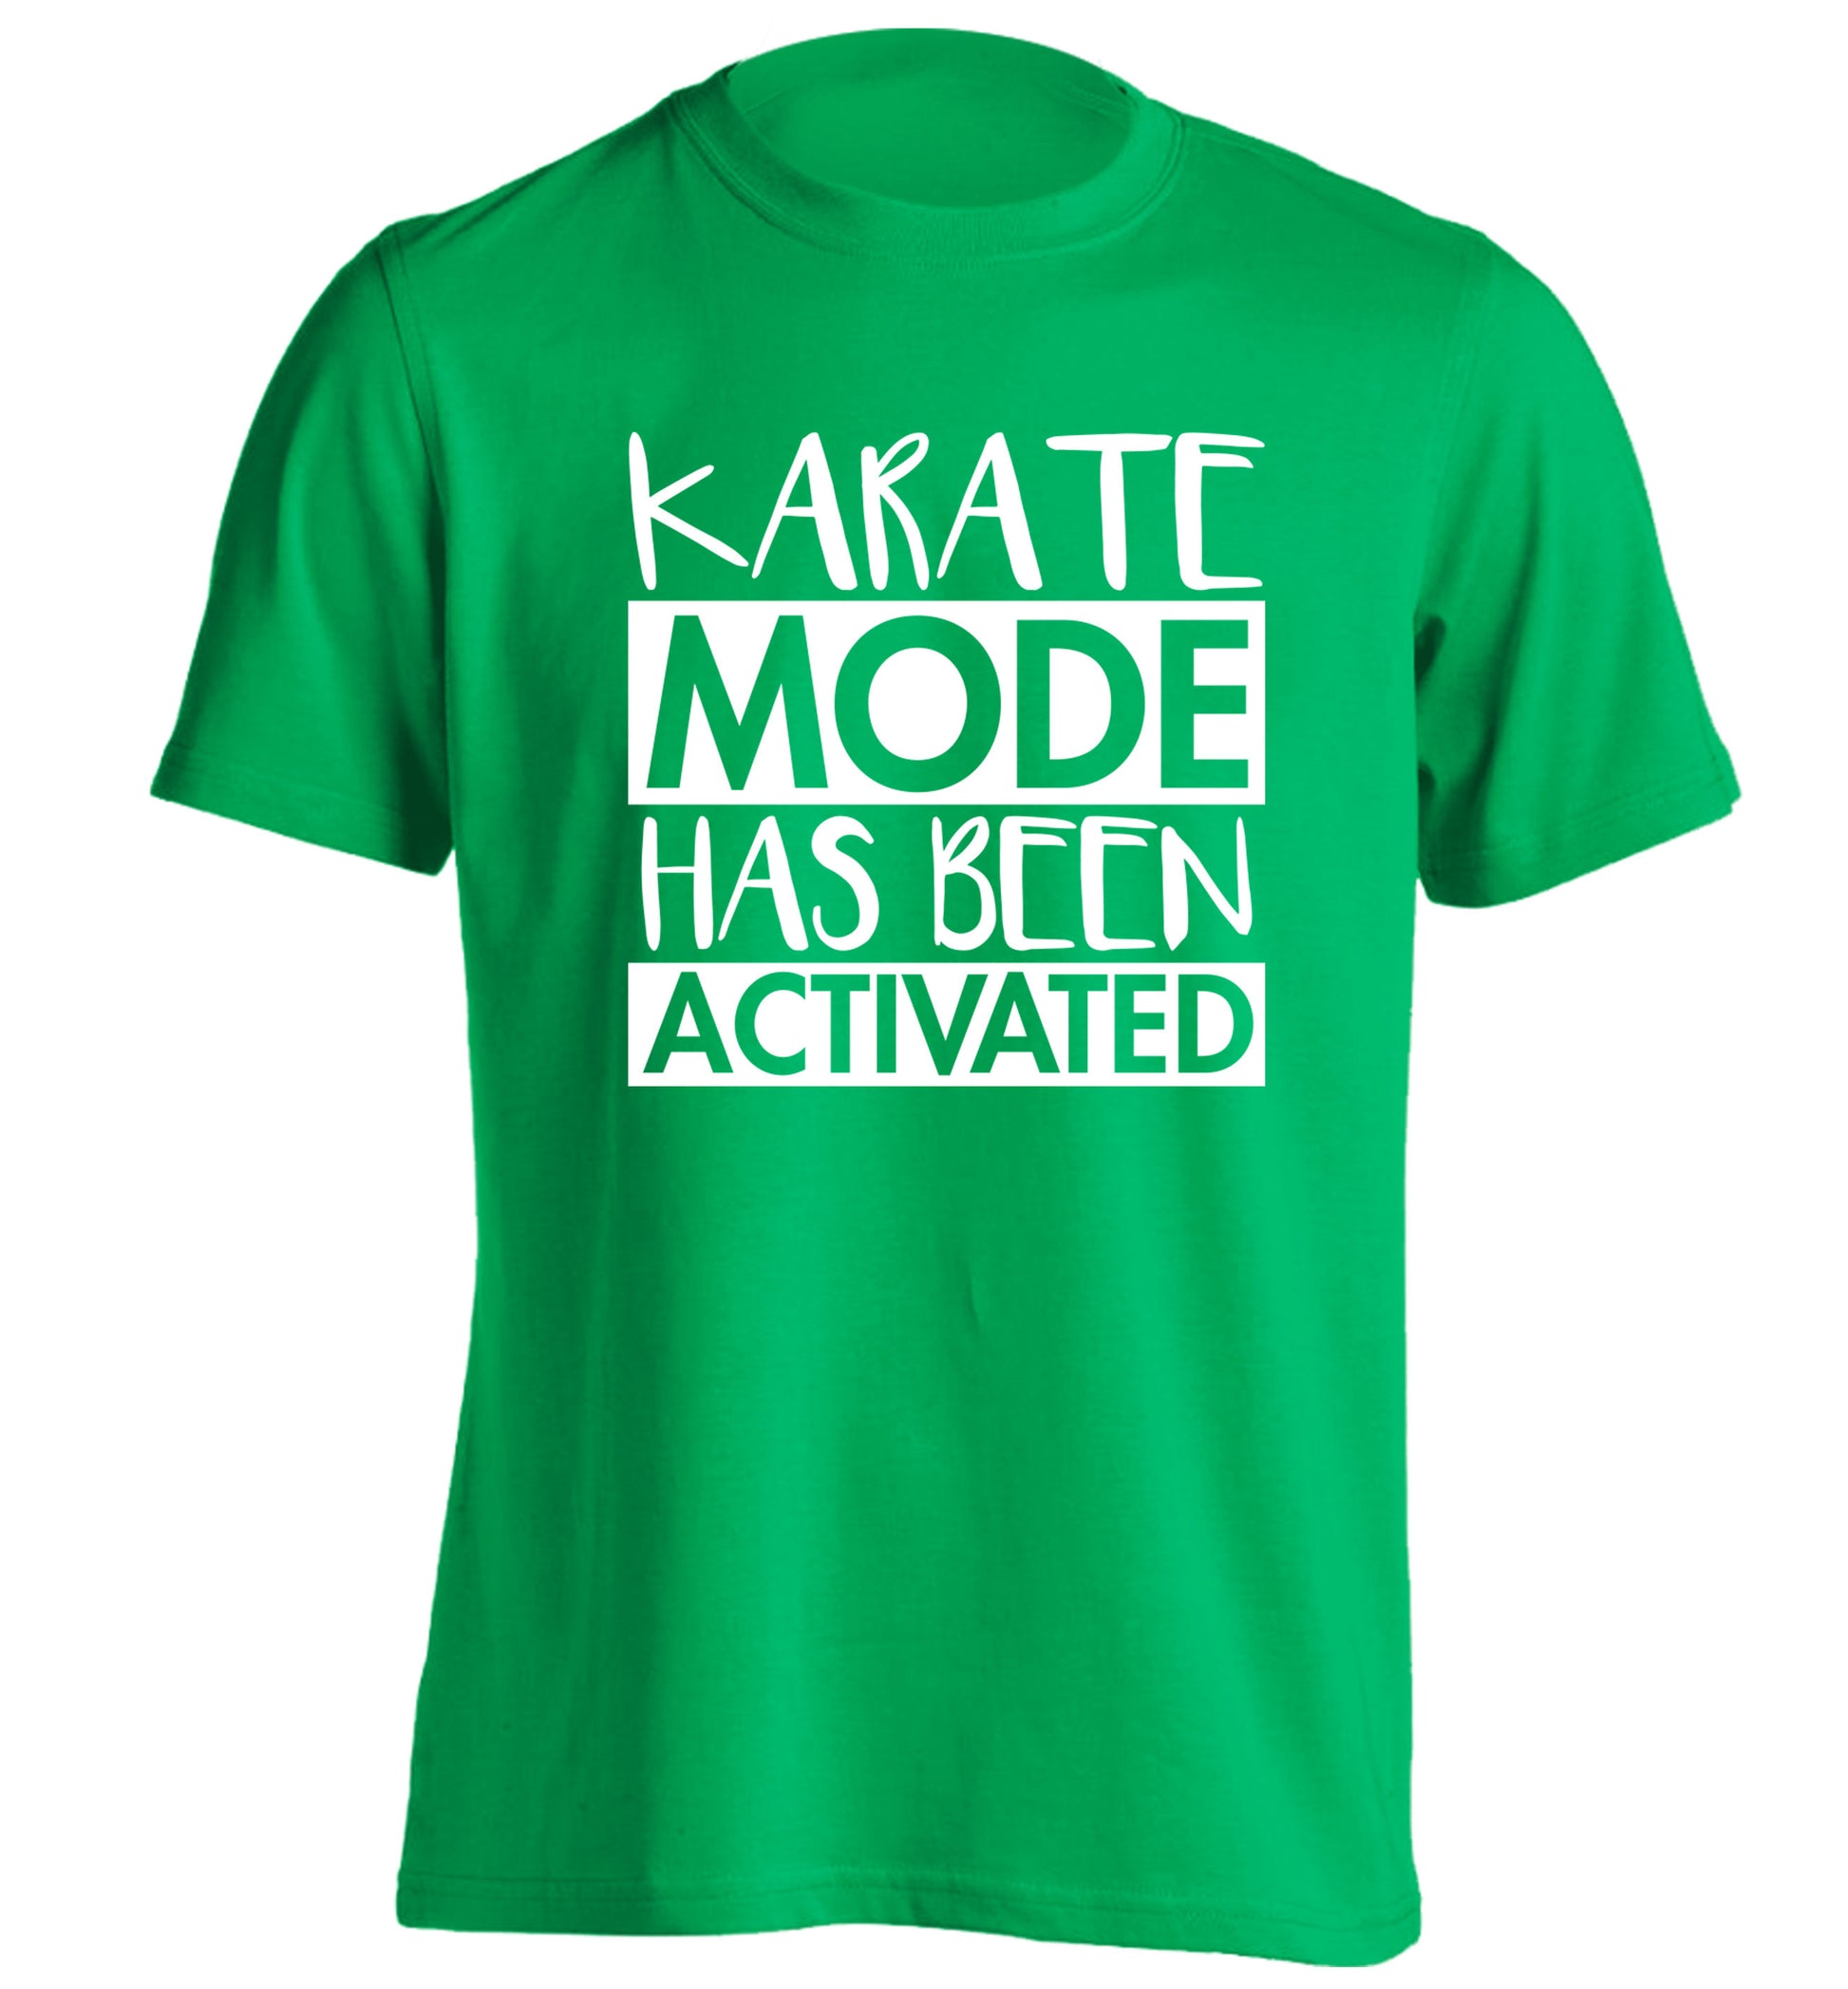 Karate mode activated adults unisex green Tshirt 2XL